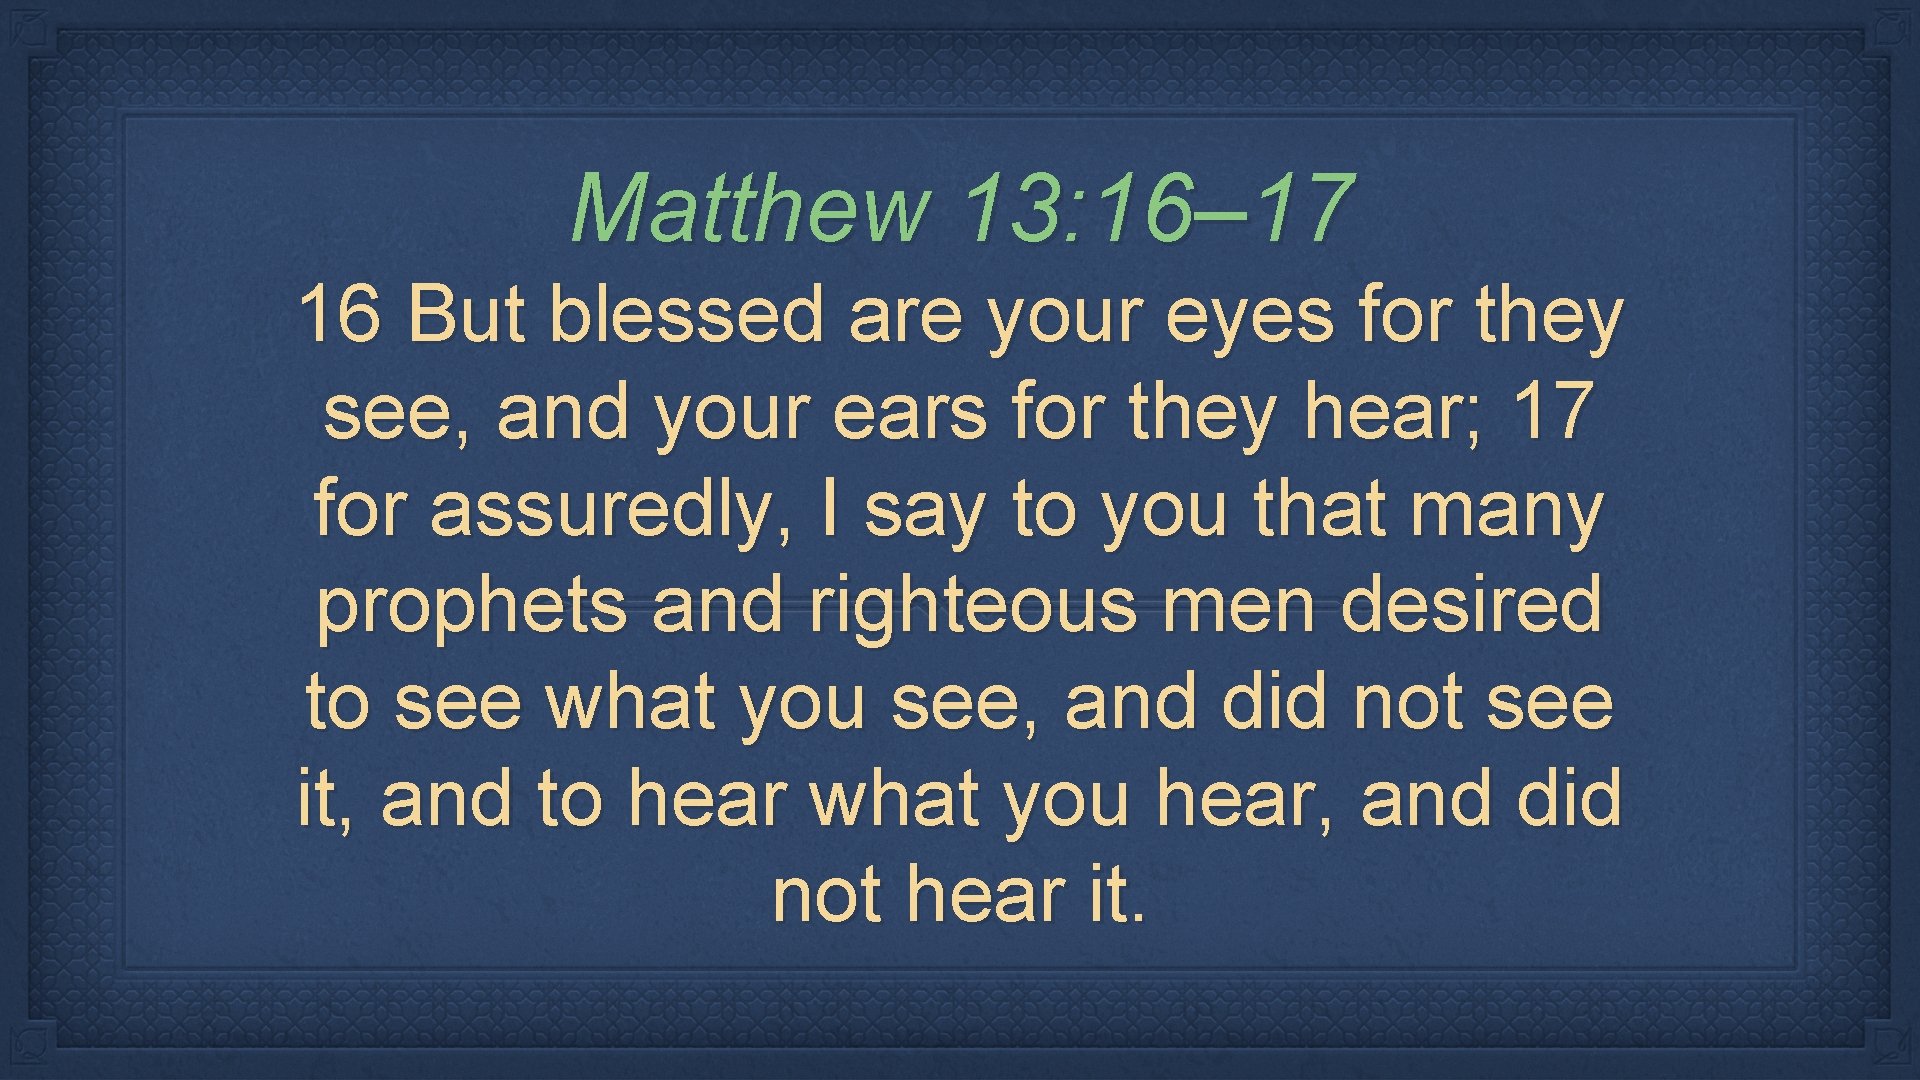 Matthew 13: 16– 17 16 But blessed are your eyes for they see, and